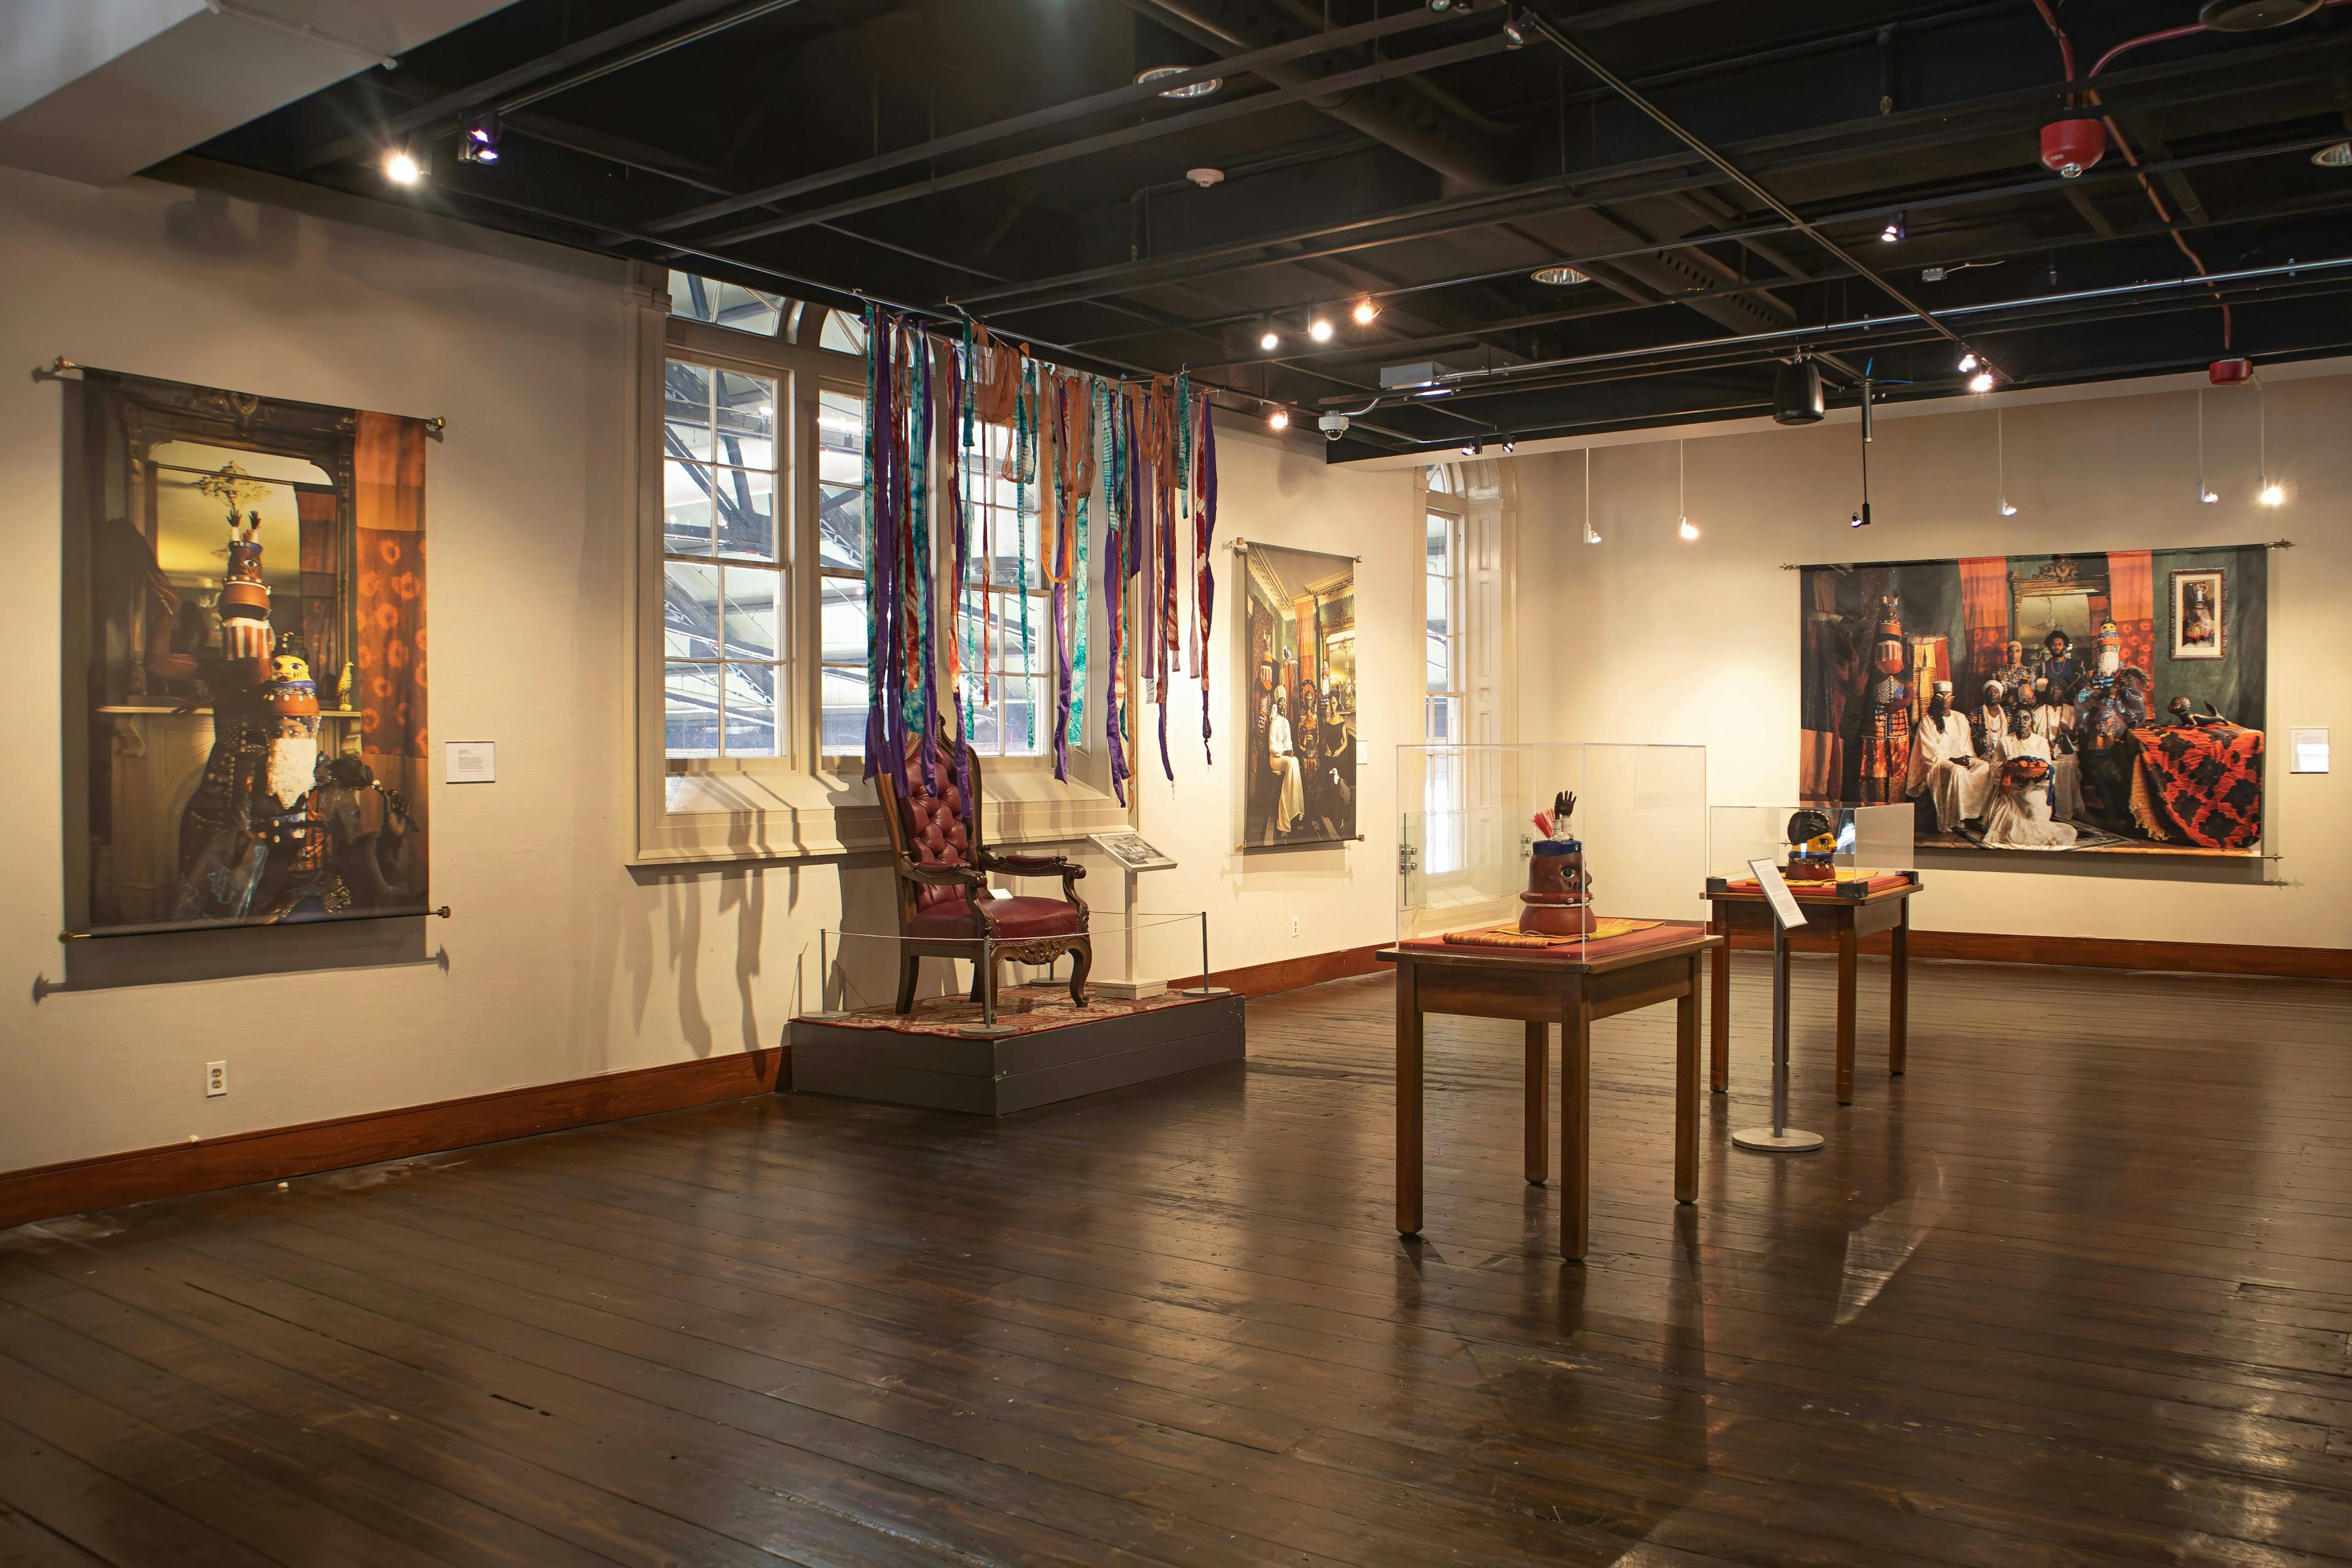 Installation view at the Market Gallery